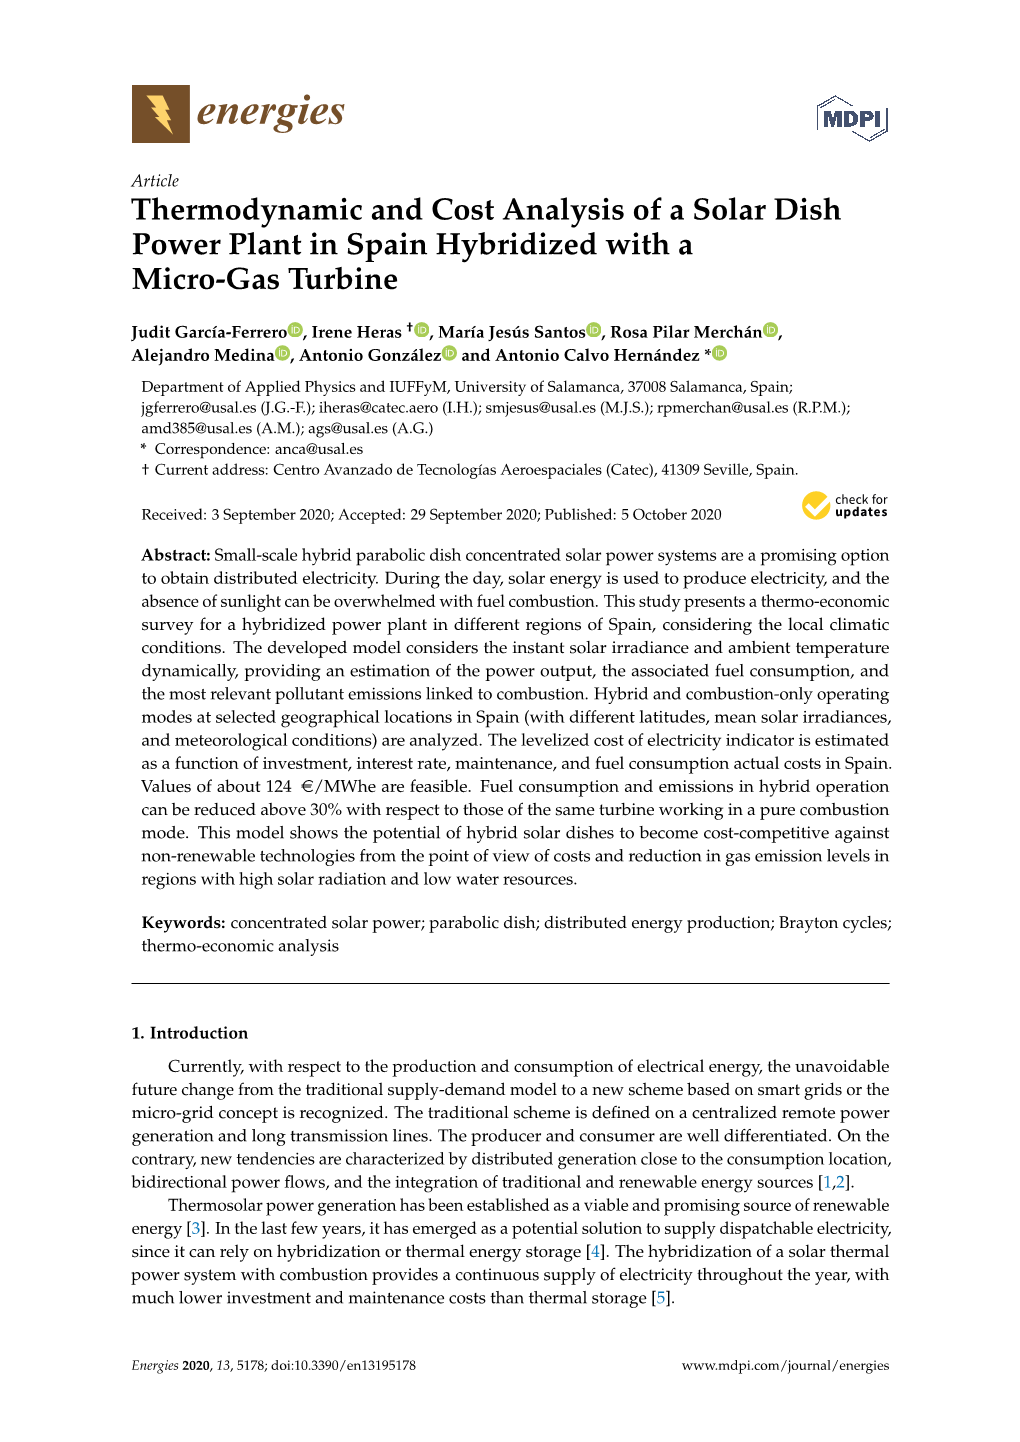 Thermodynamic and Cost Analysis of a Solar Dish Power Plant in Spain Hybridized with a Micro-Gas Turbine